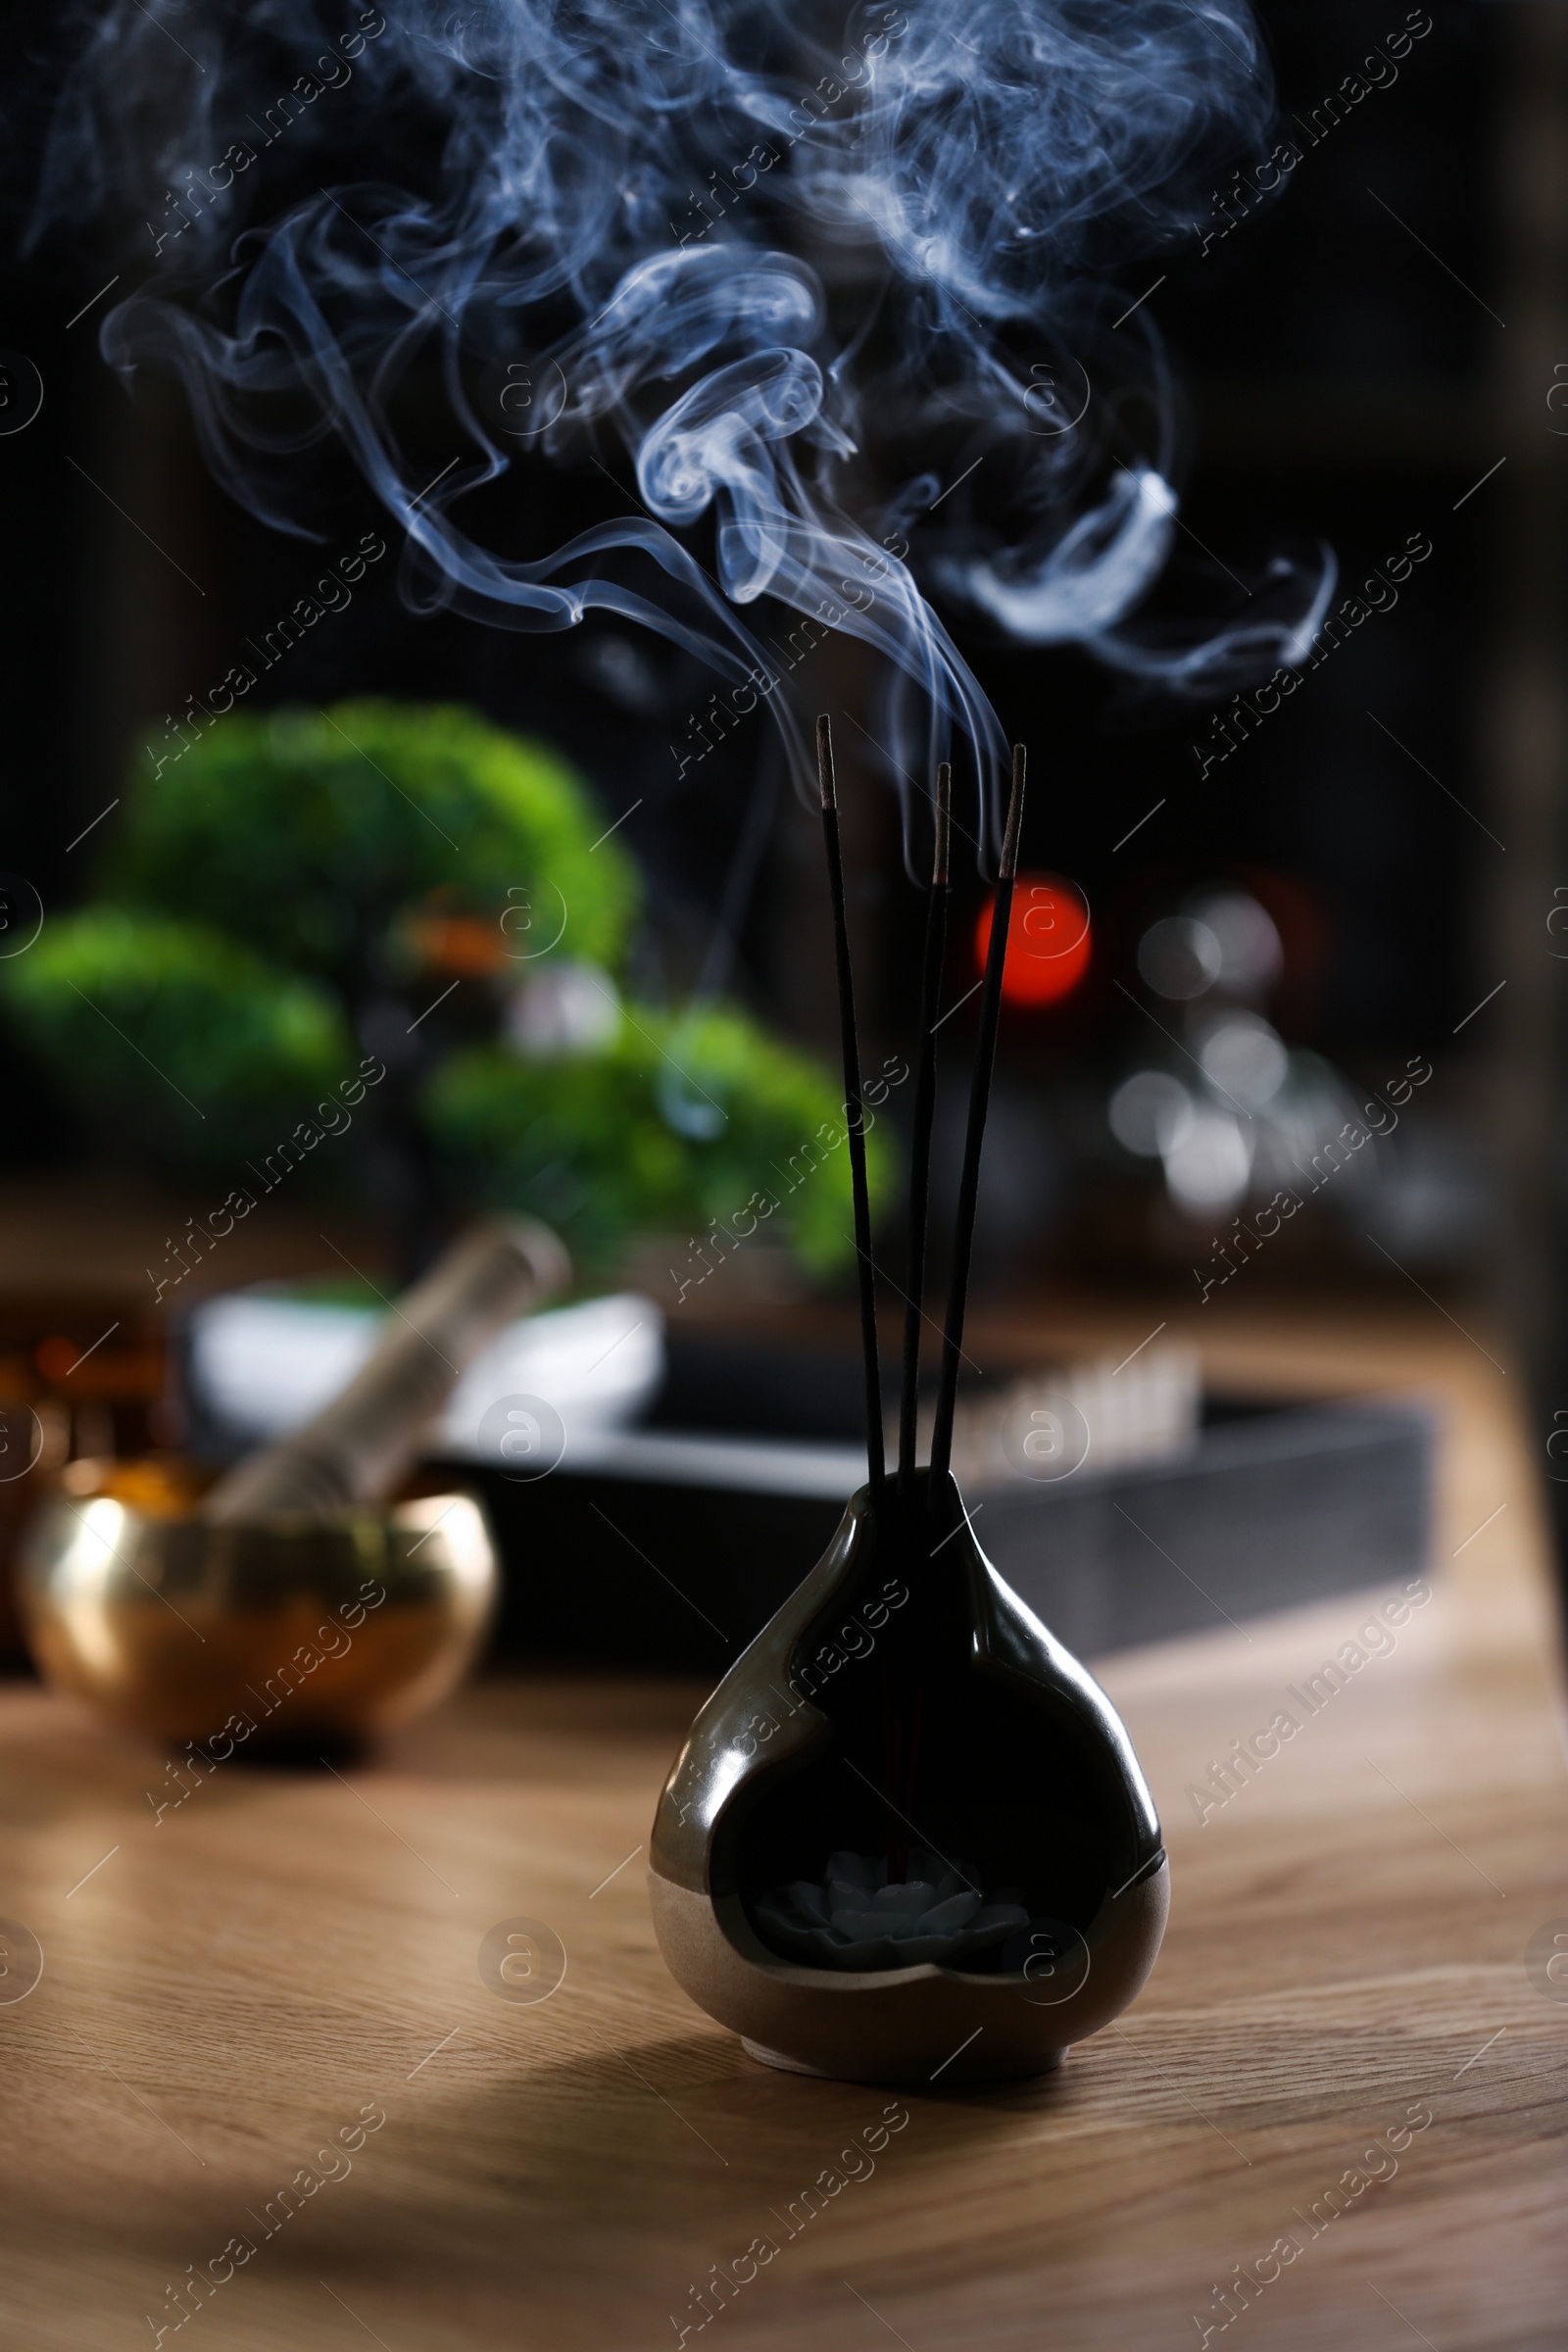 Photo of Incense sticks smoldering on wooden table indoors